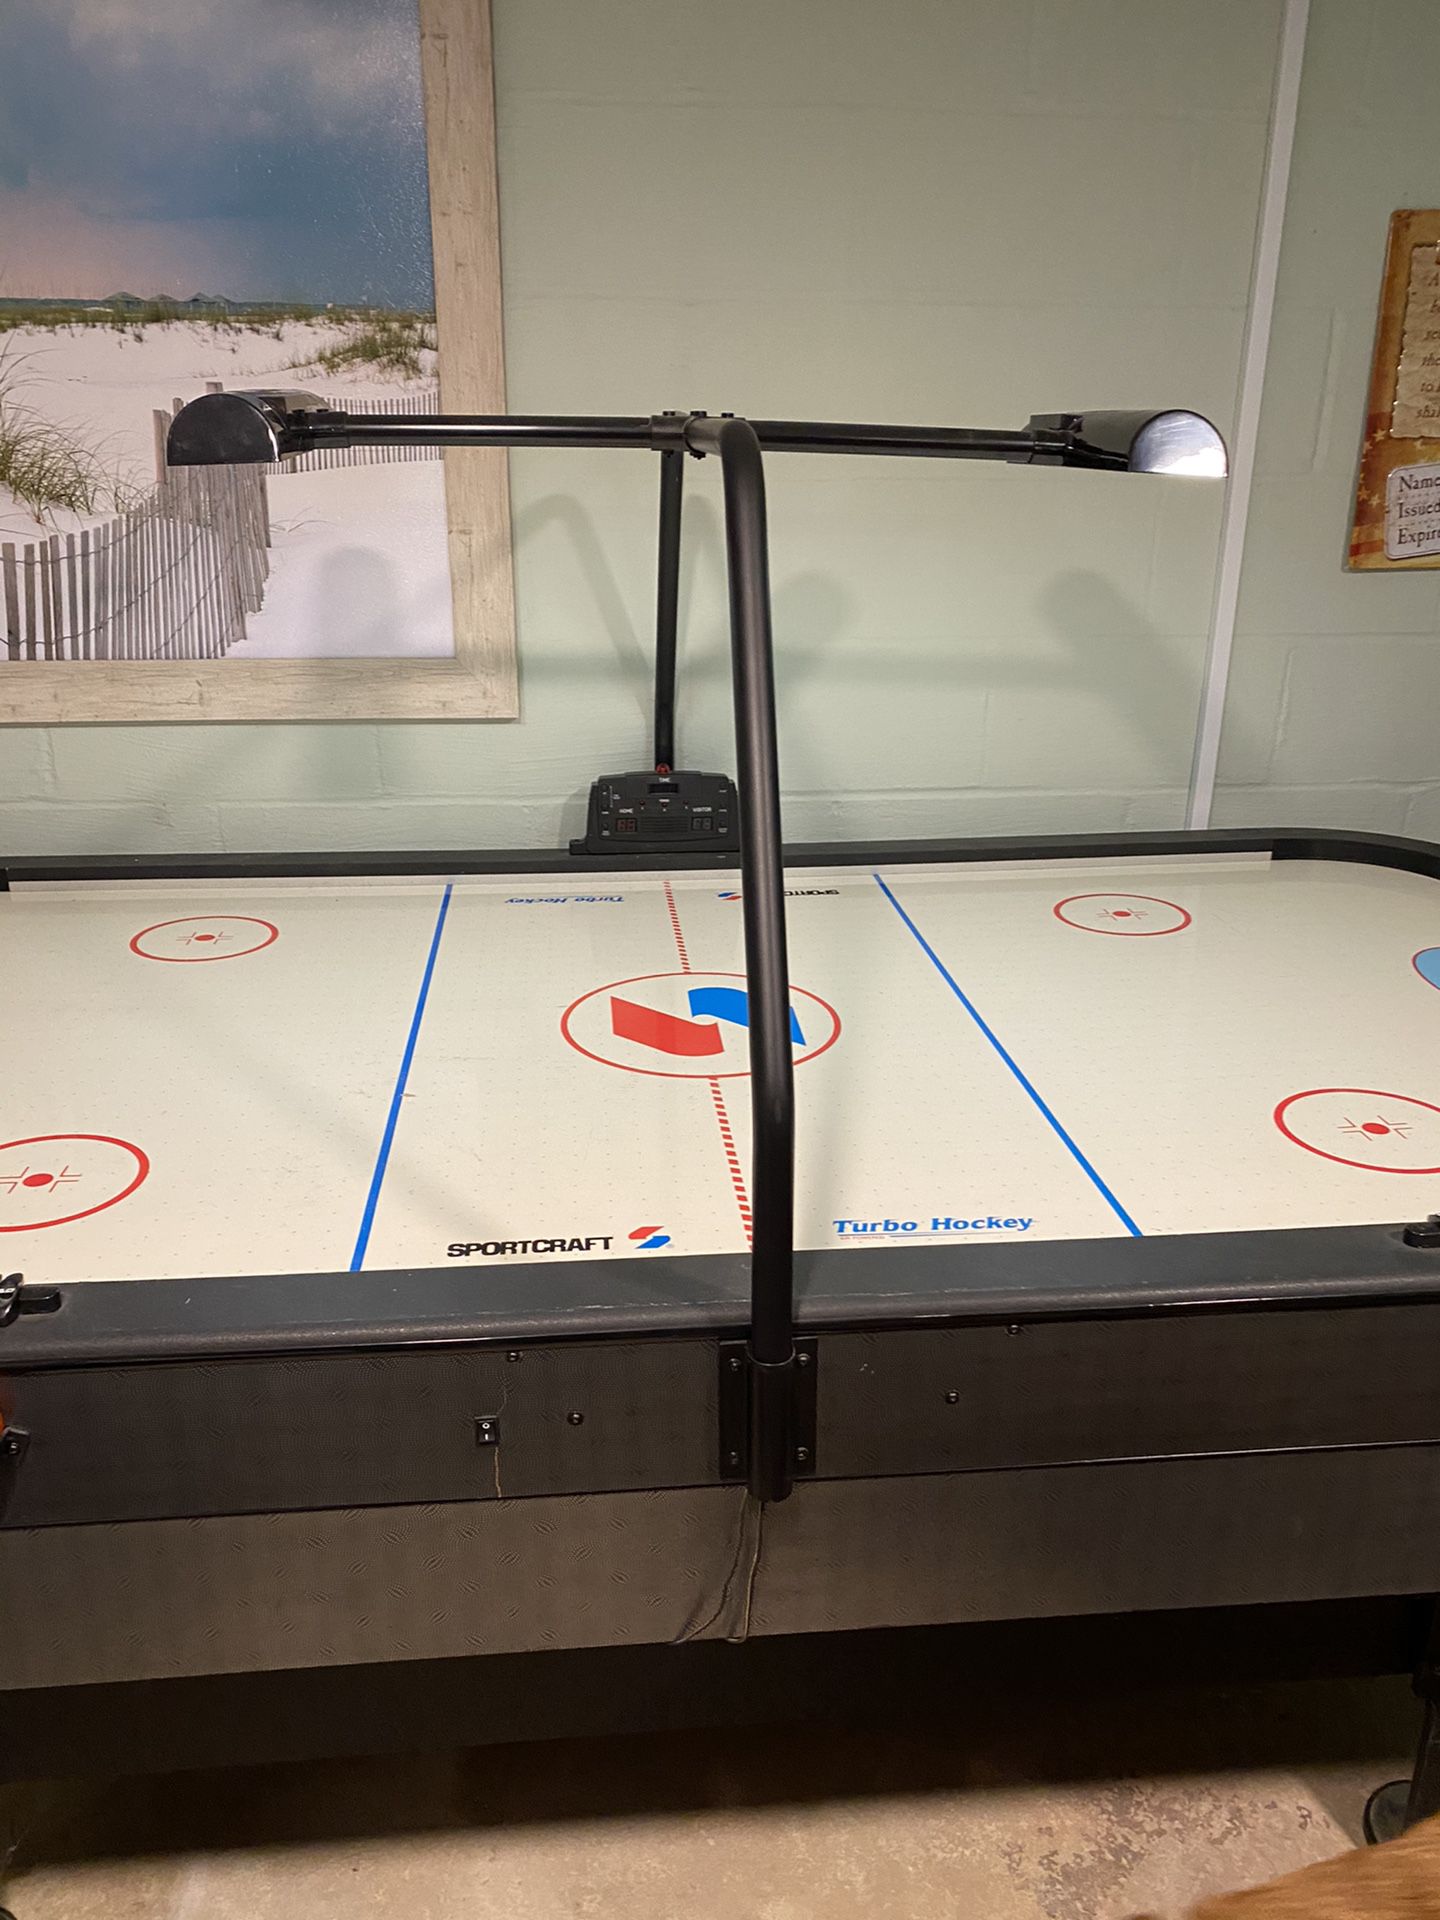 Sportcraft arcade style air hockey table, excellent shape, electronic lights and scoring, all pieces with it